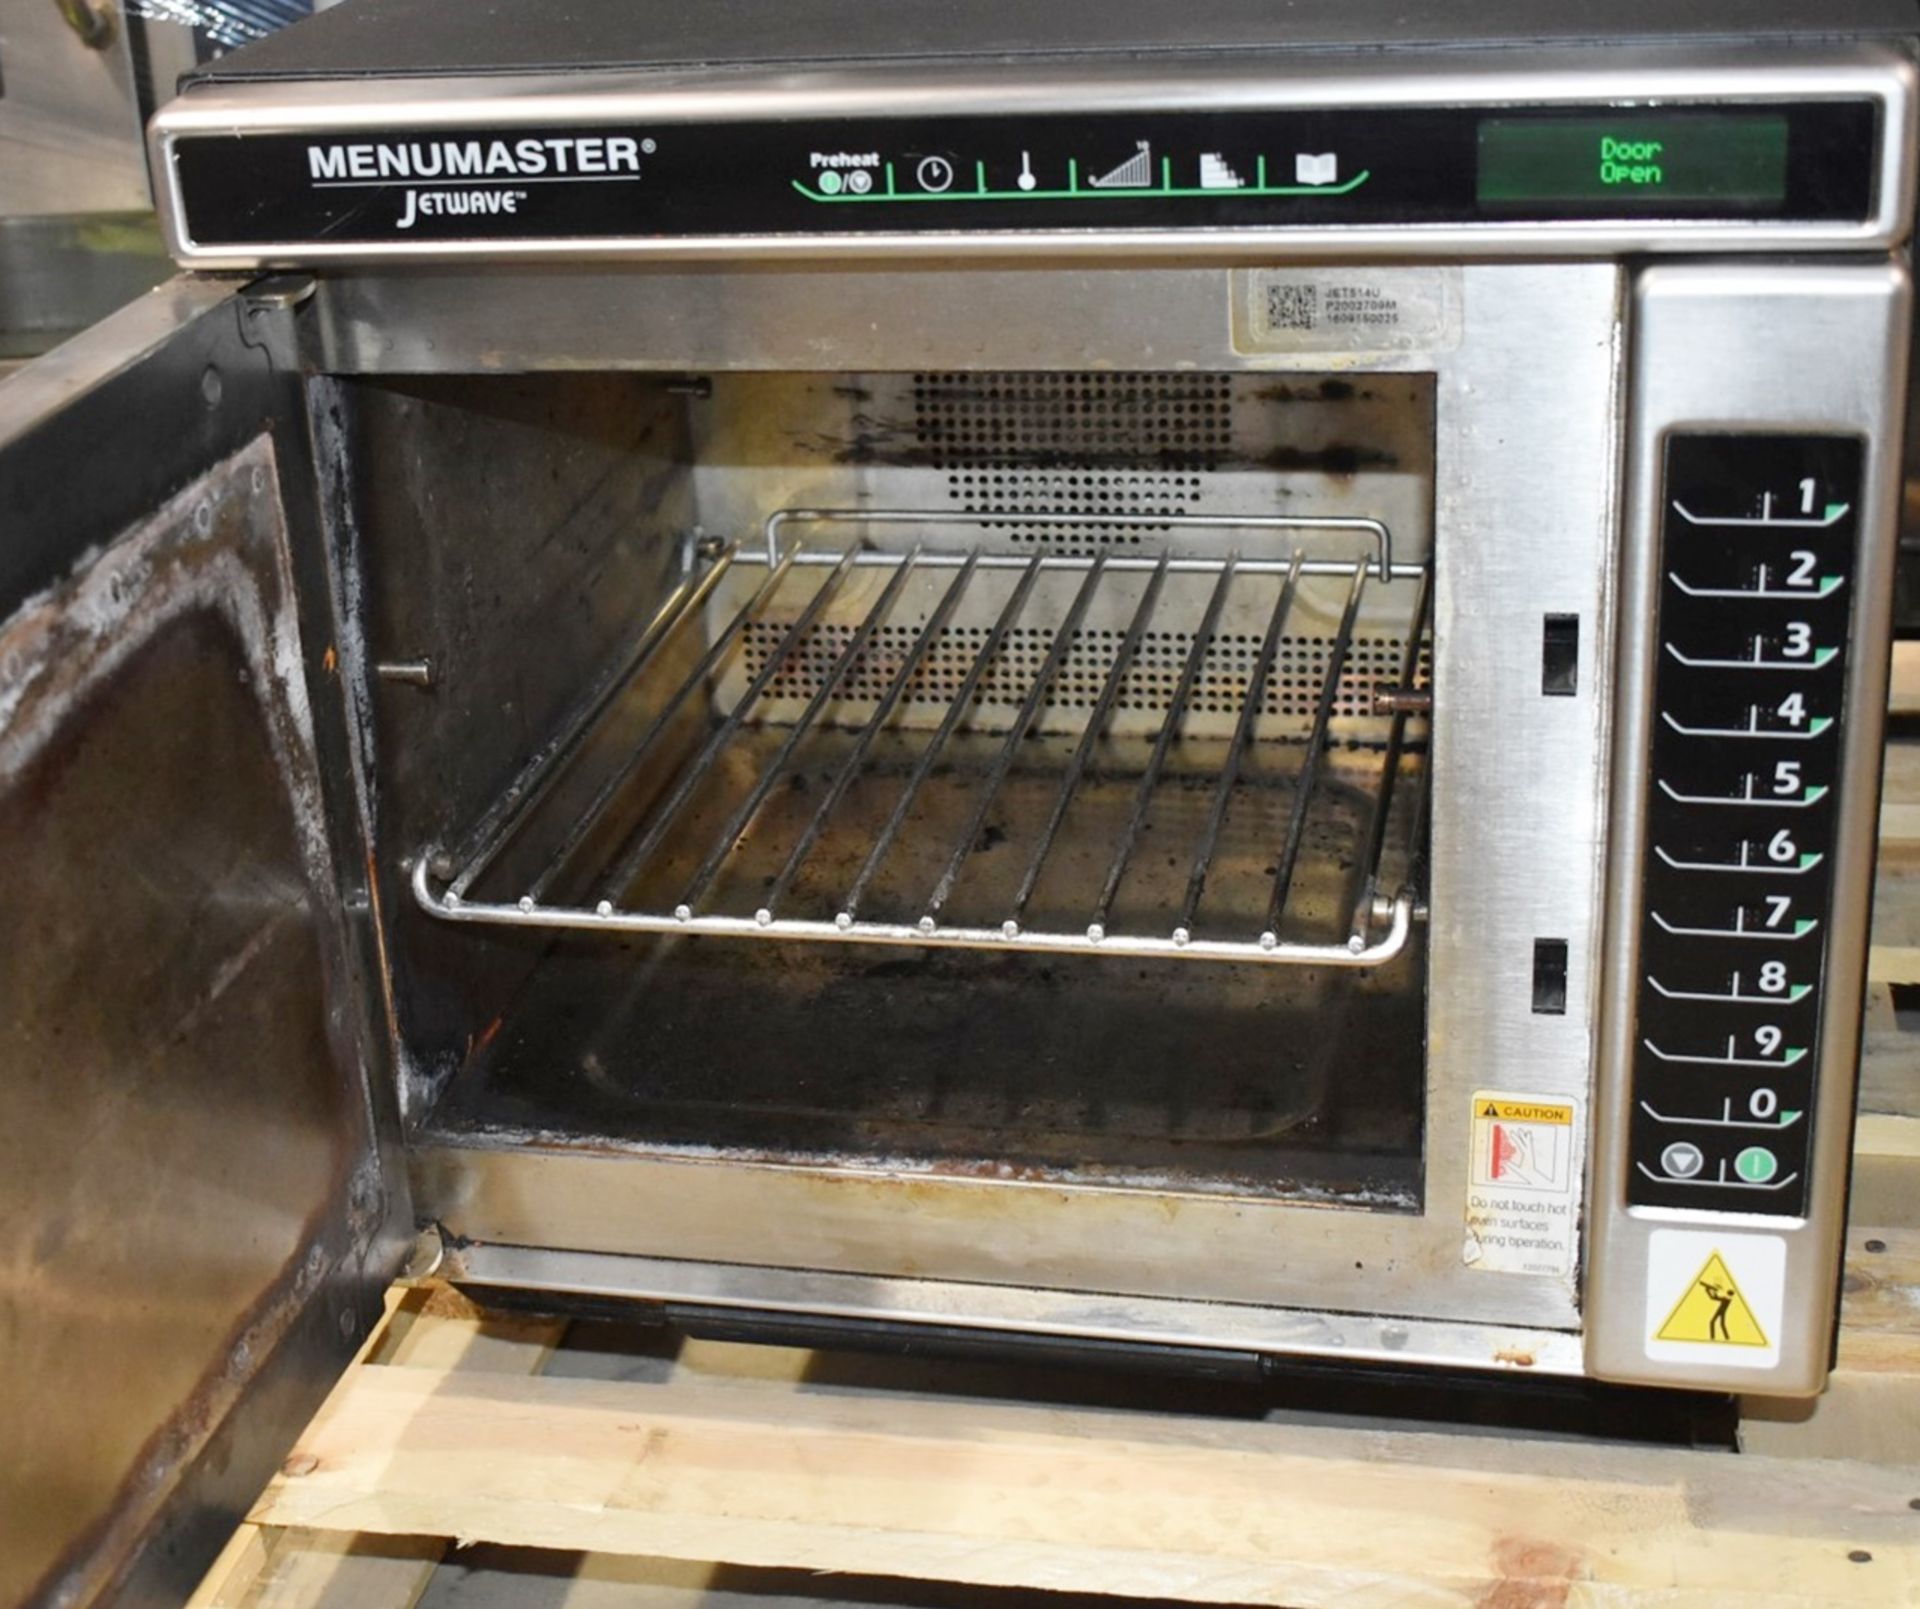 1 x Menumaster Jetwave JET514U High Speed Combination Microwave Oven - RRP £2,400 - Recently Removed - Image 6 of 8